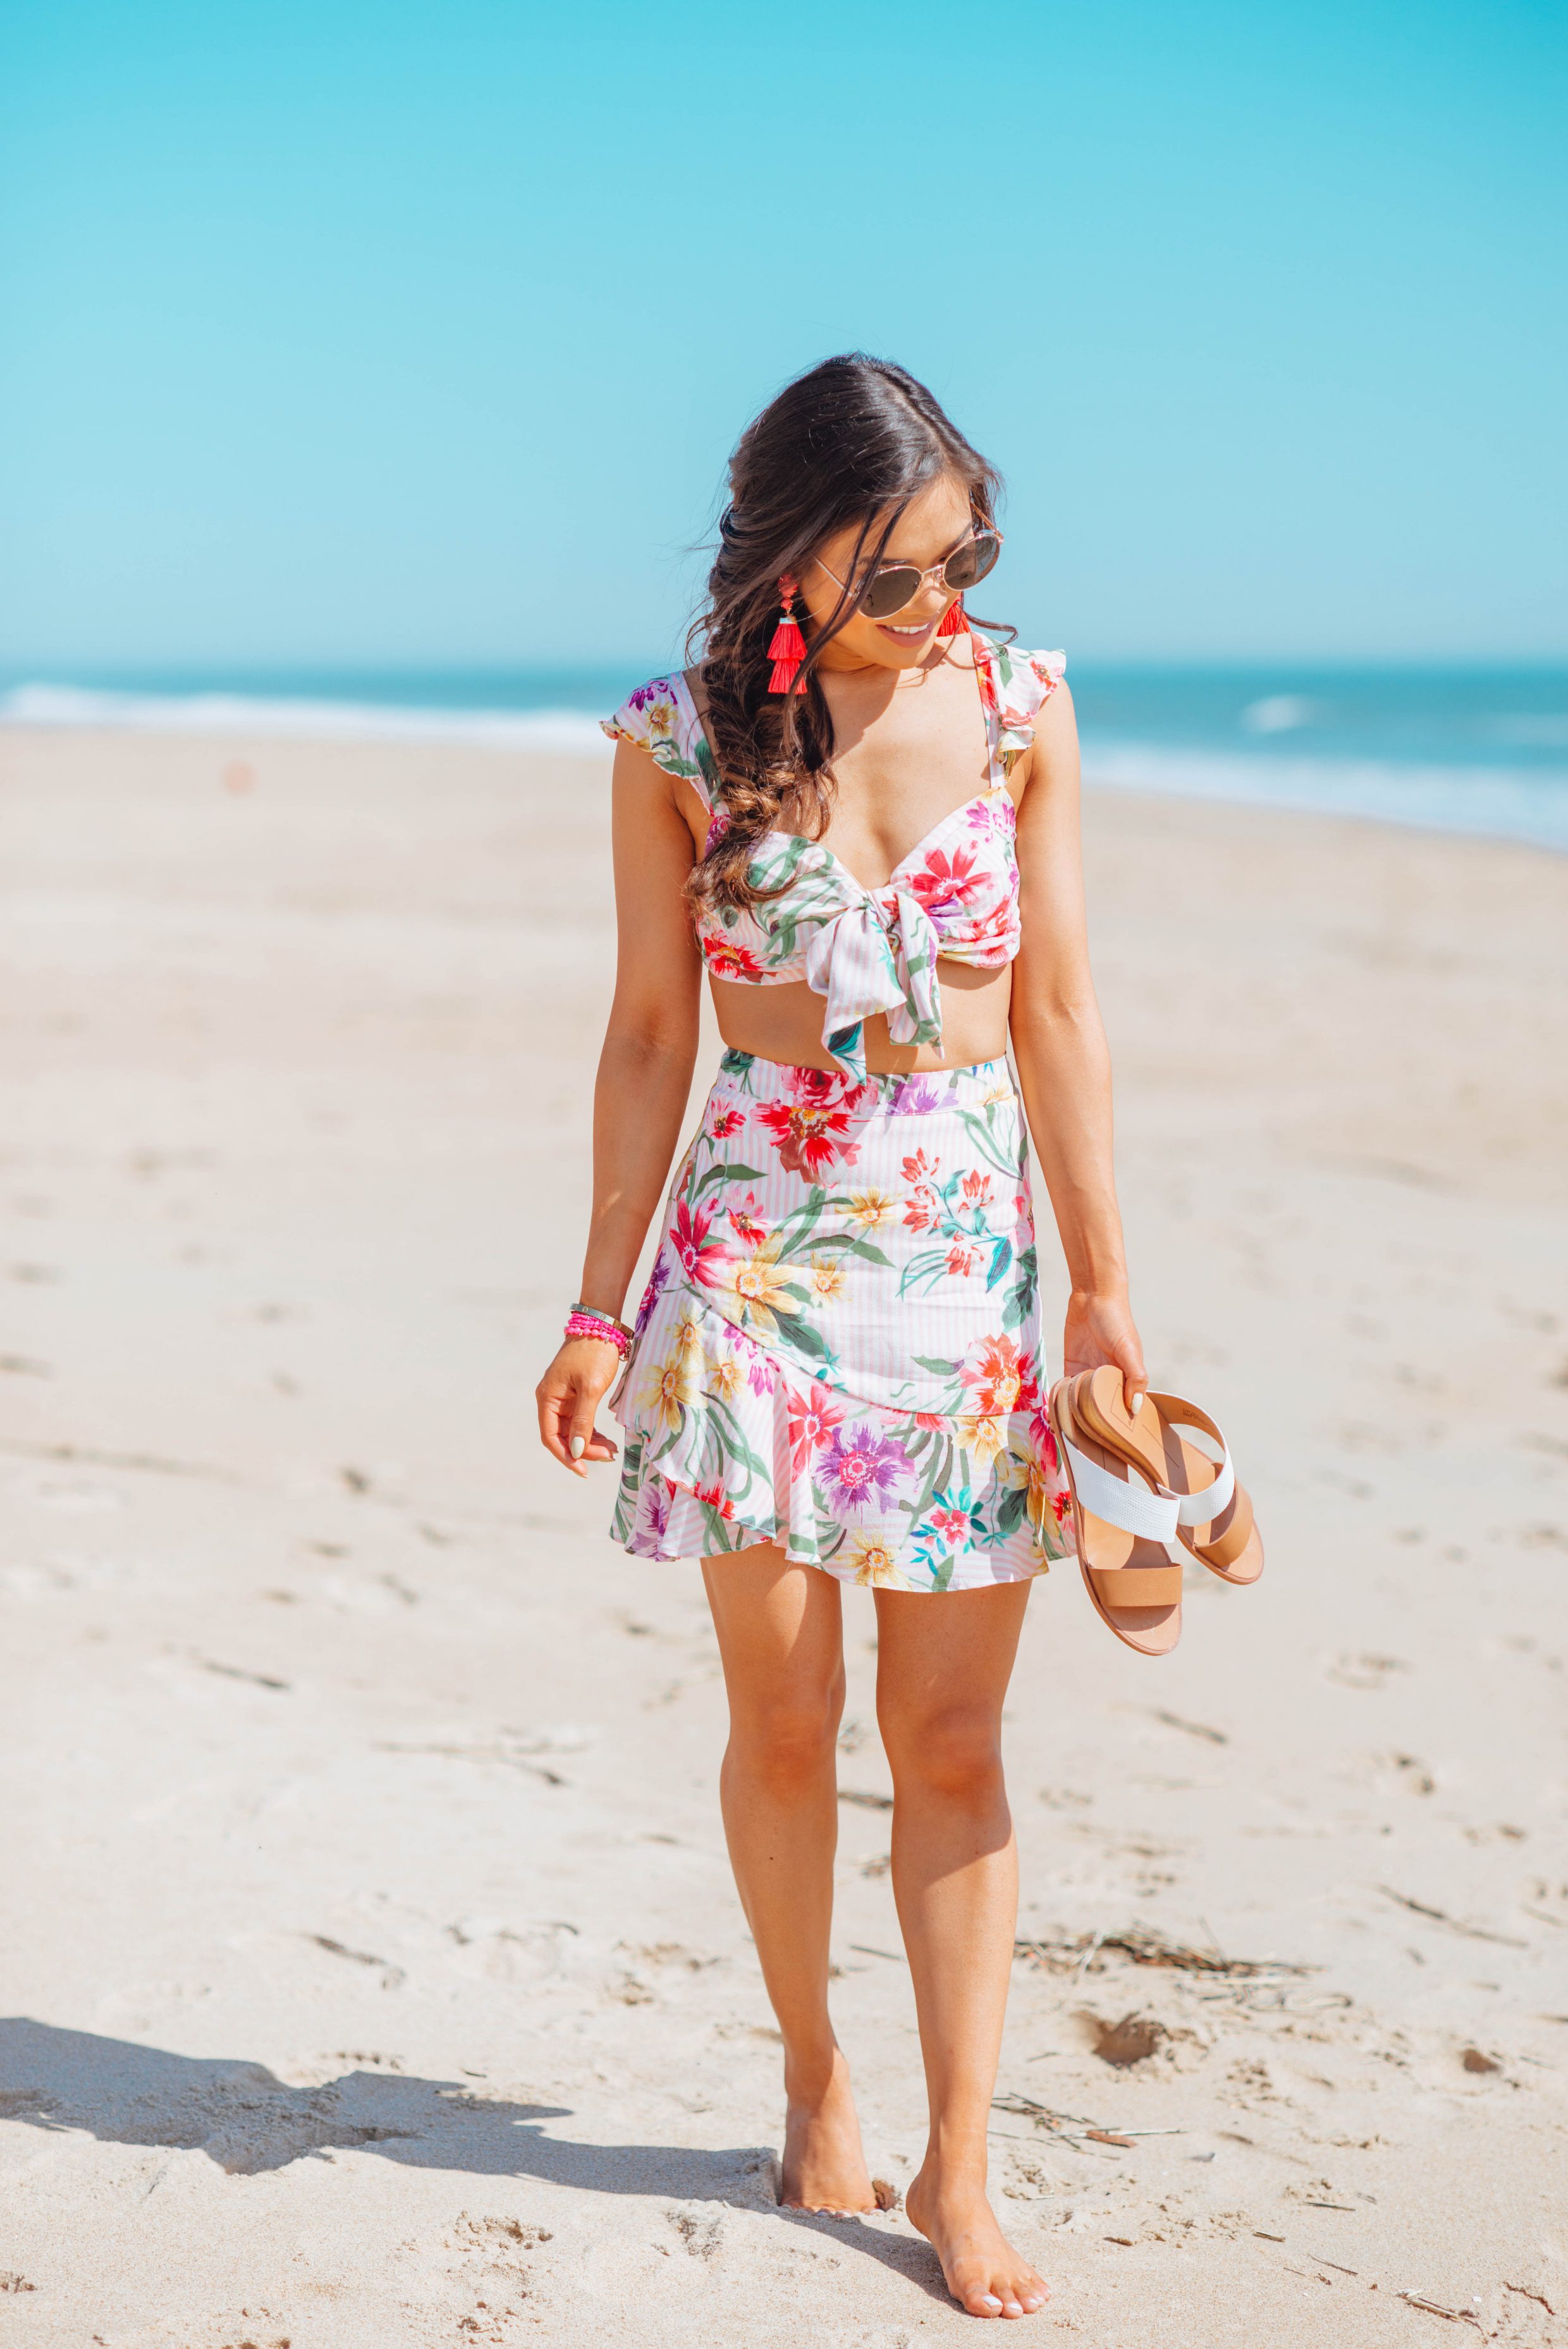 Blogger Hoang-Kim wears a floral two piece set with cognac sandals and a fishtail braid for the beach